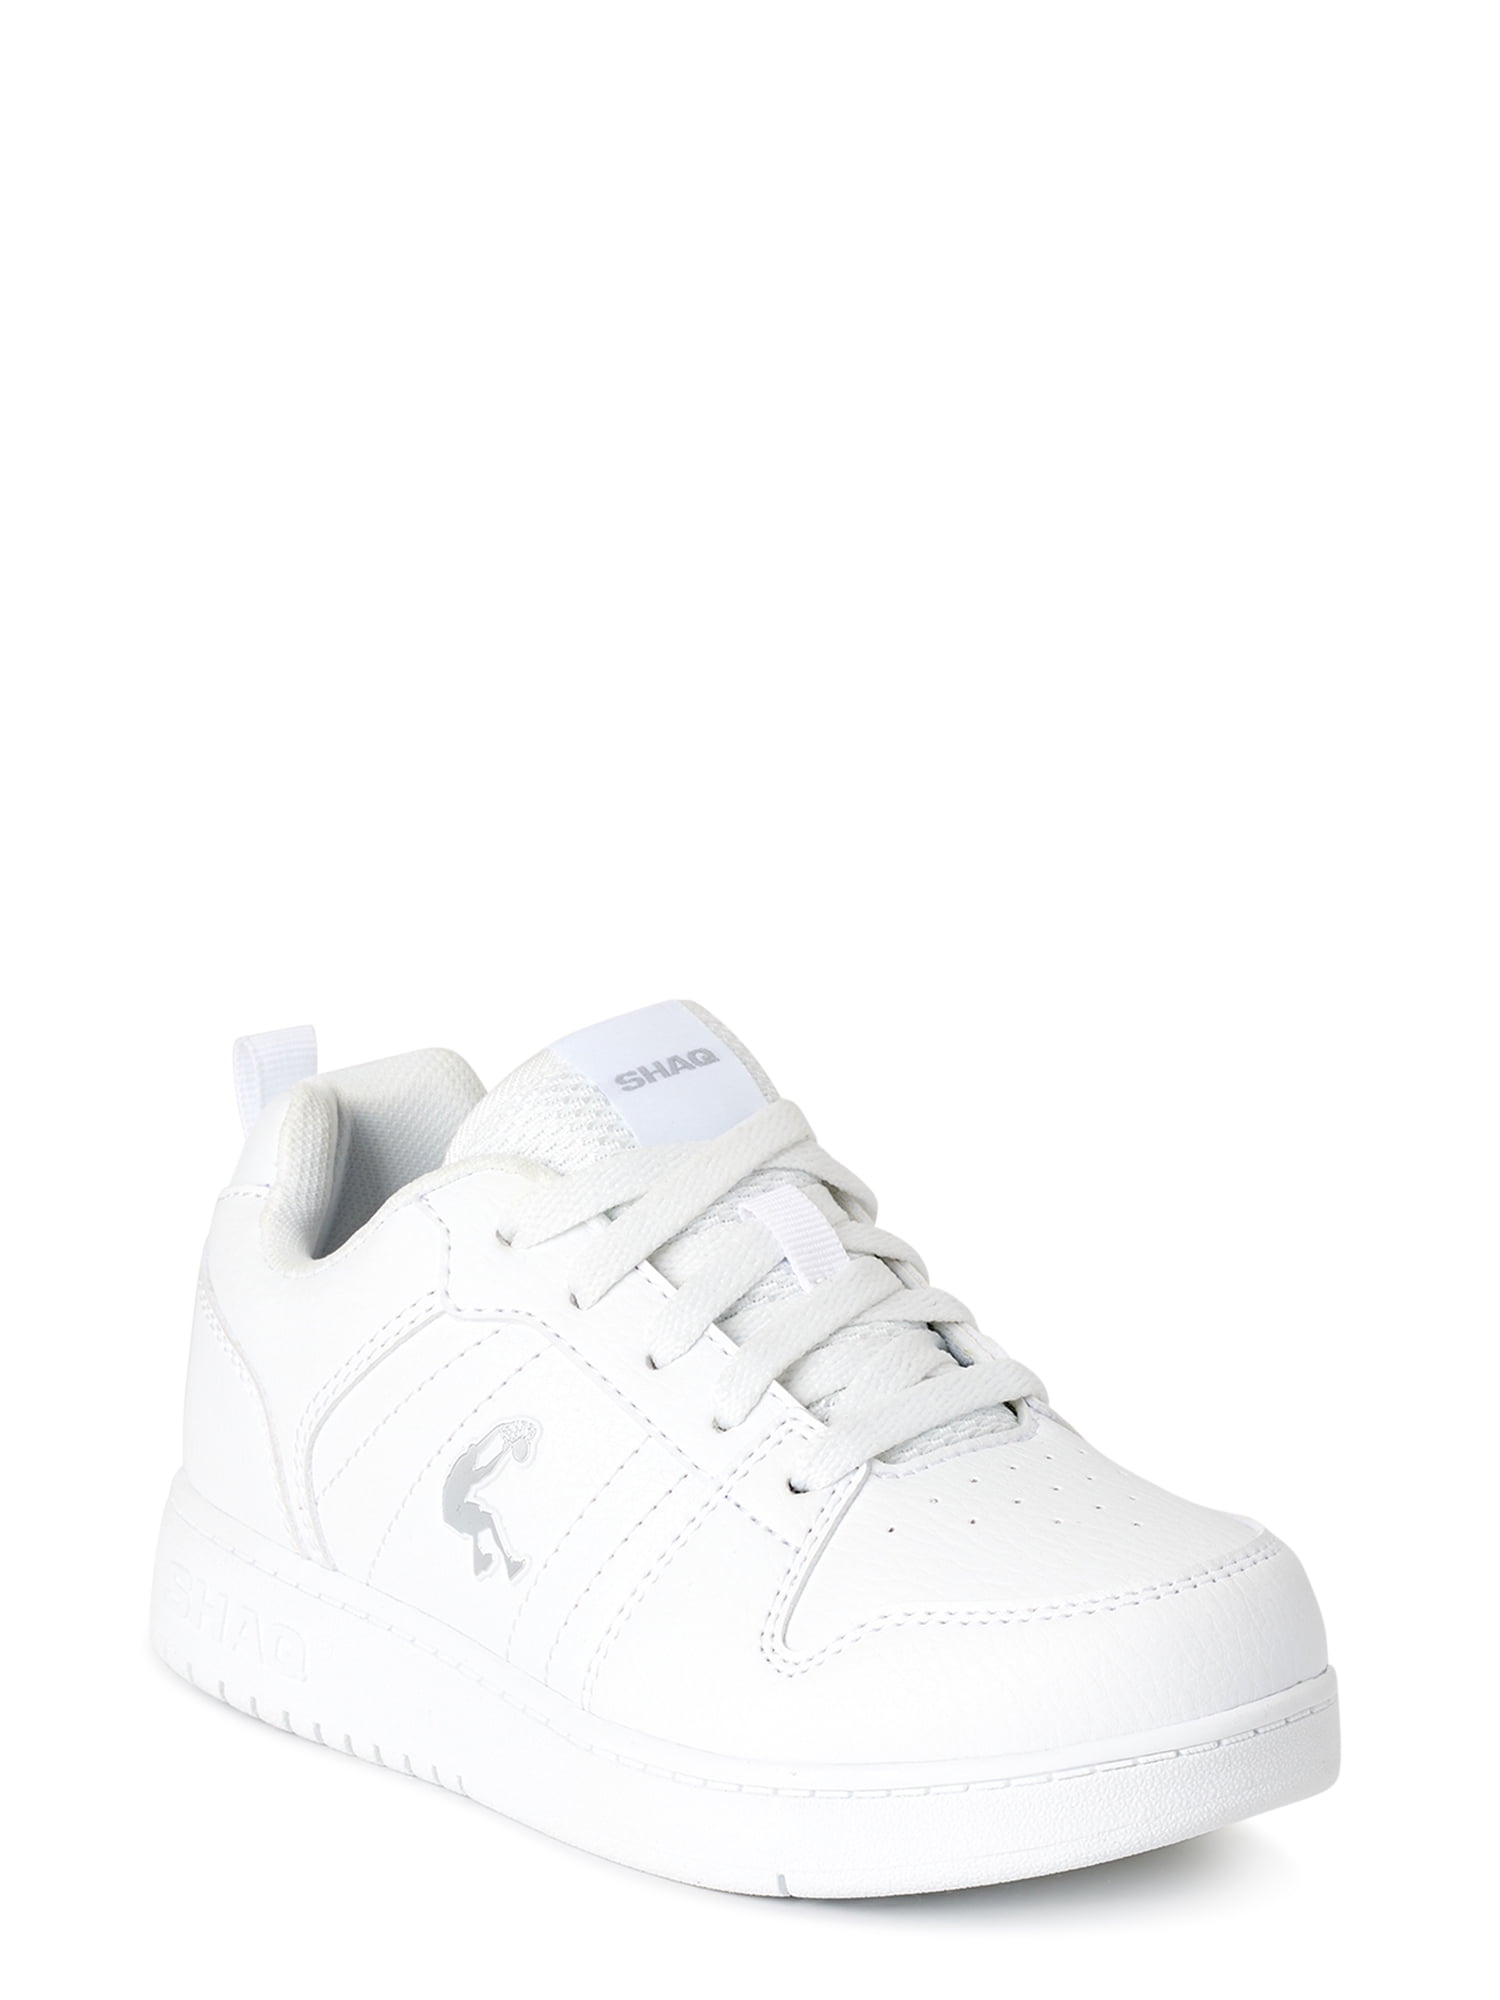 White Casual Shoes - Buy White Casual Shoes online in India